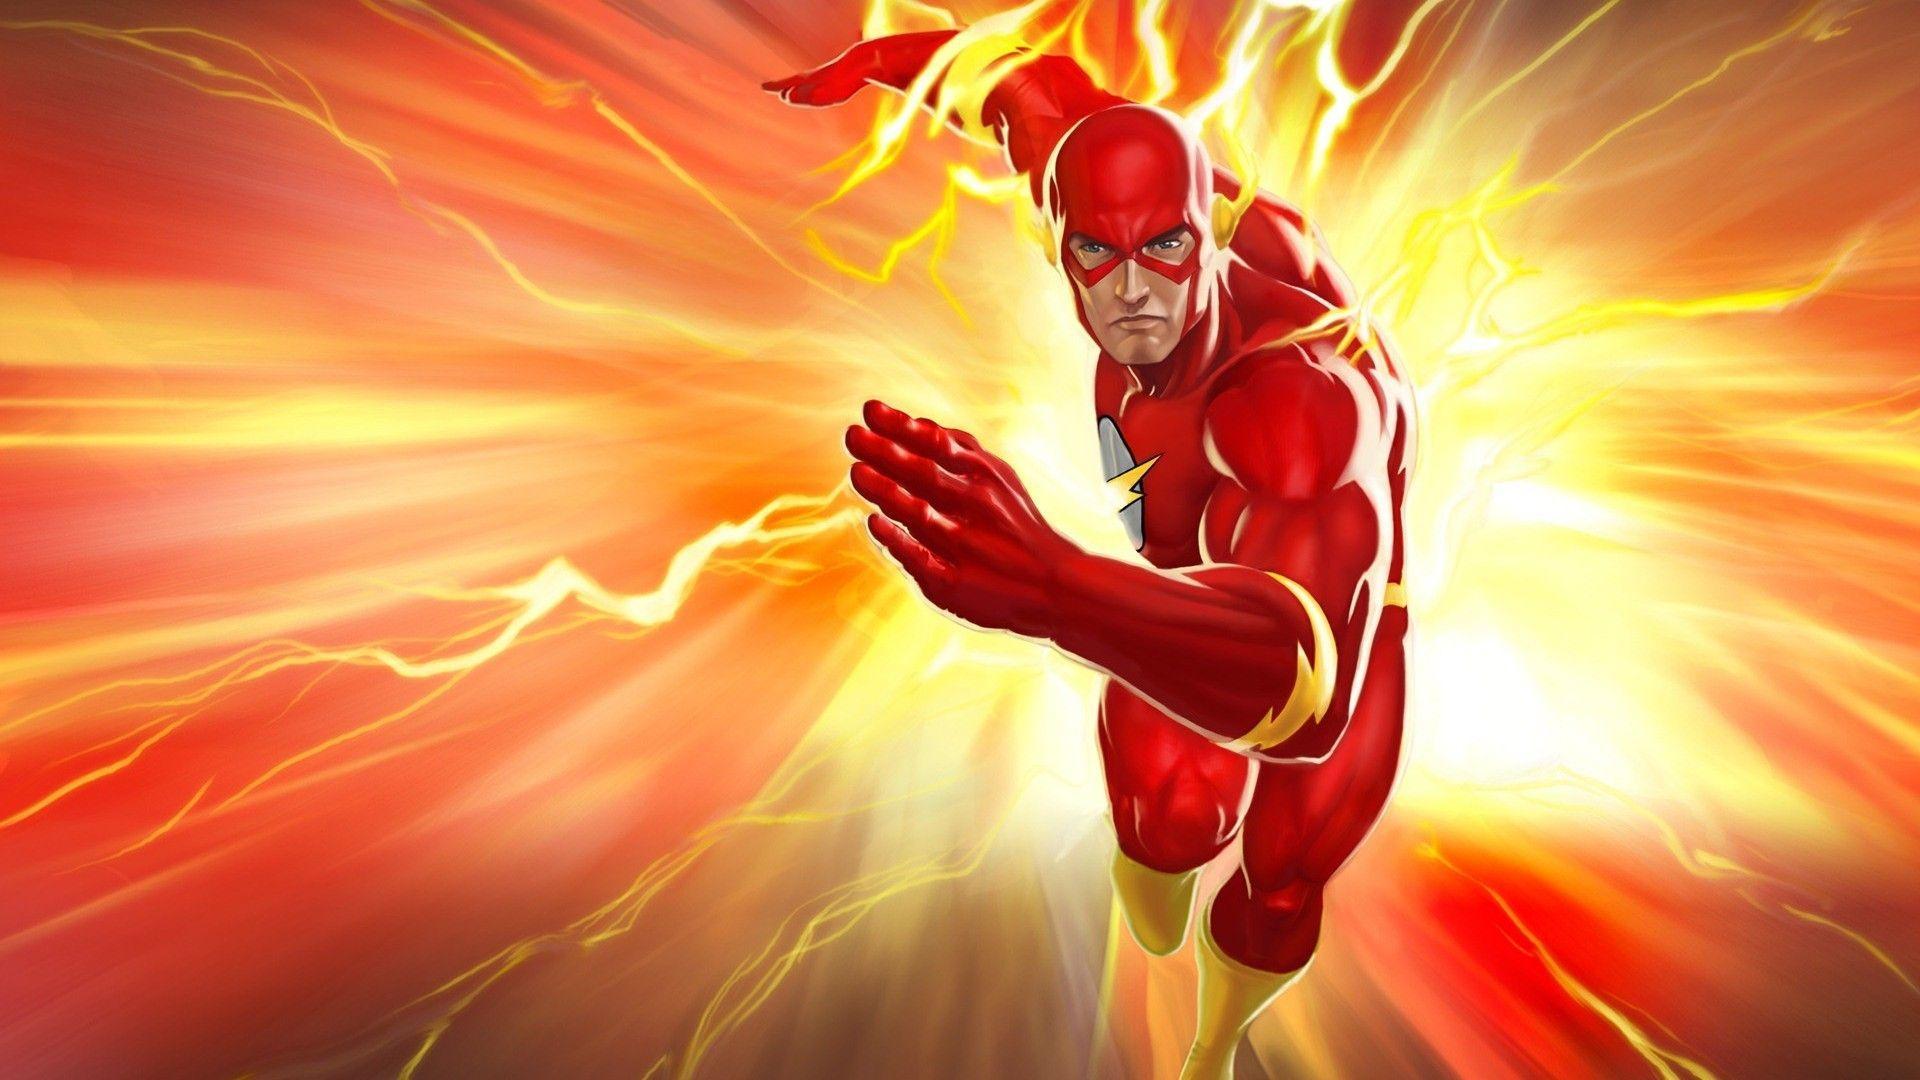 Download free the flash wallpaper for your mobile phone Zedge